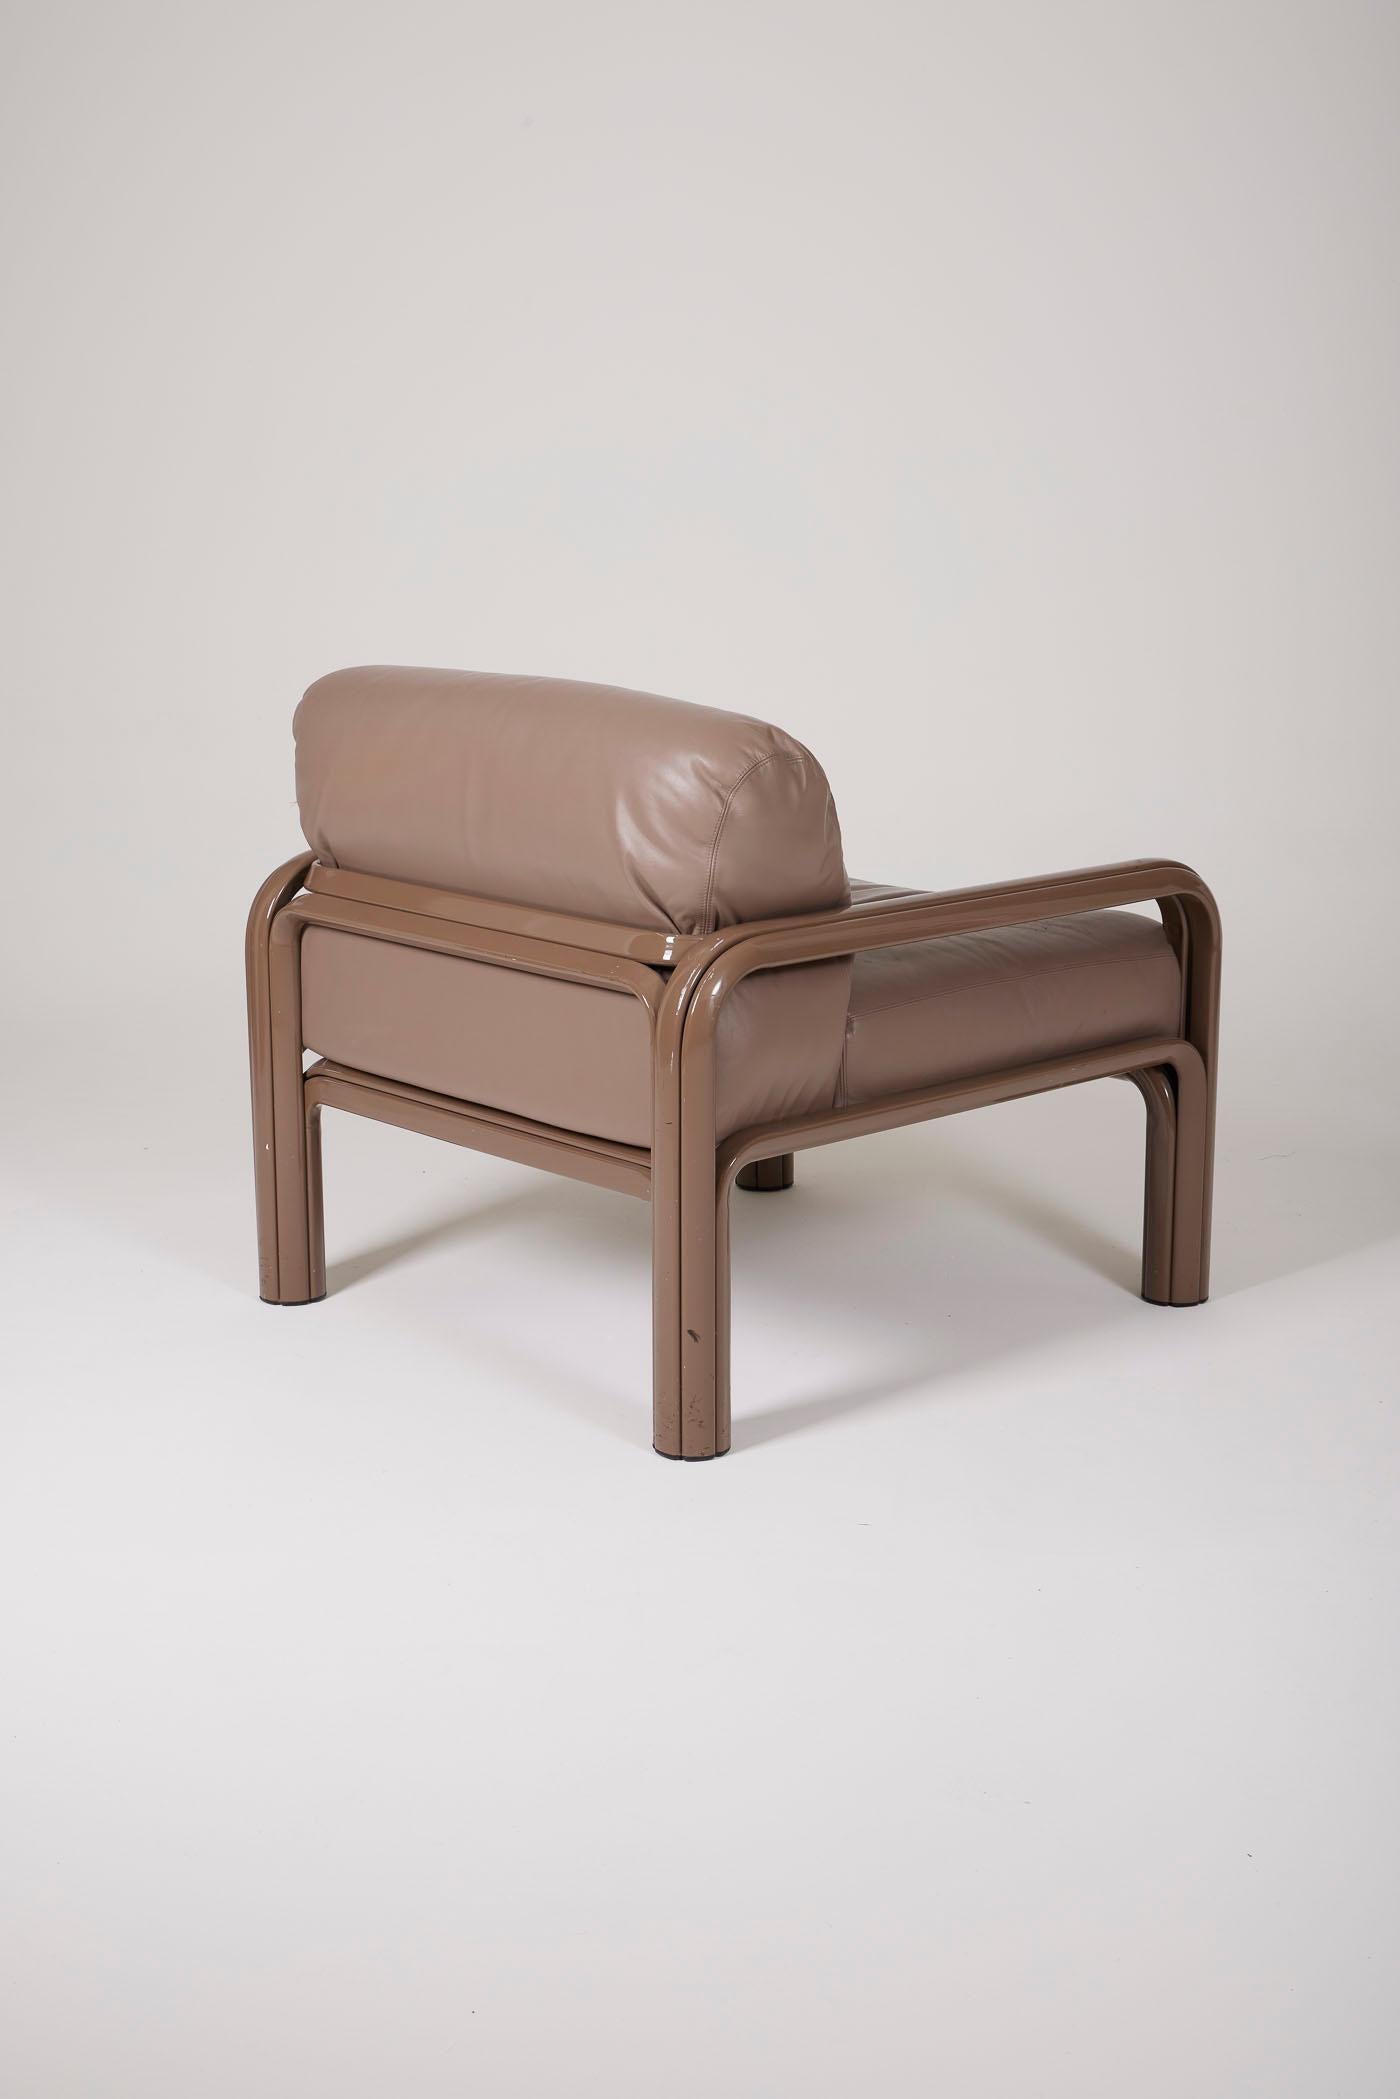 20th Century Leather armchair by Gae Aulenti